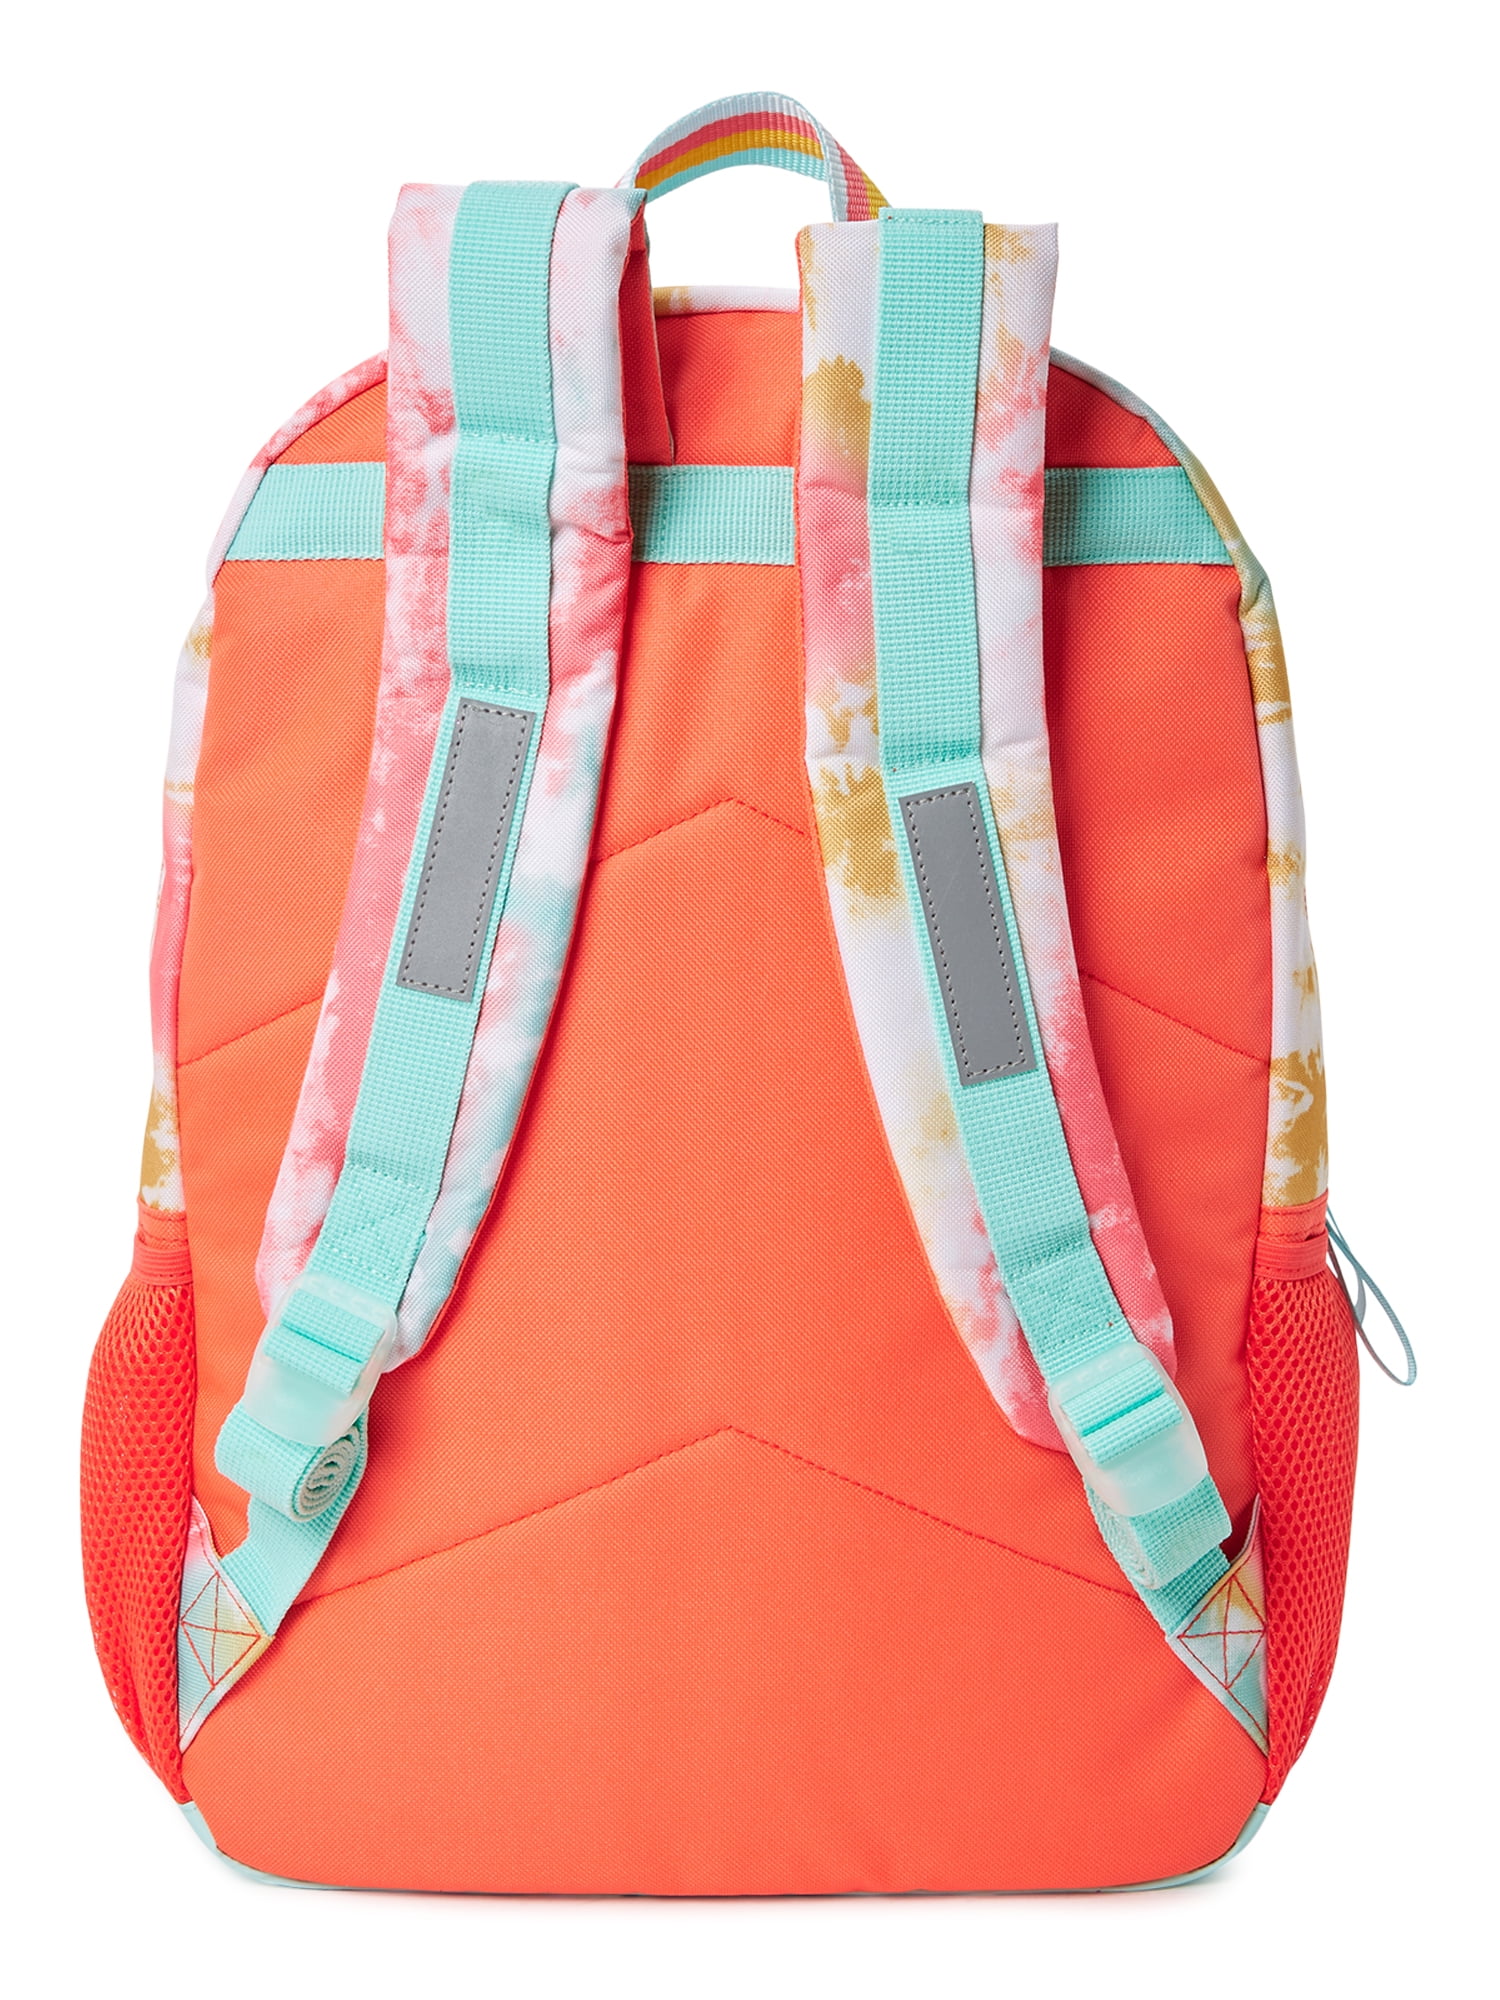 Wing School Backpack with Pencil Pouch - Teal